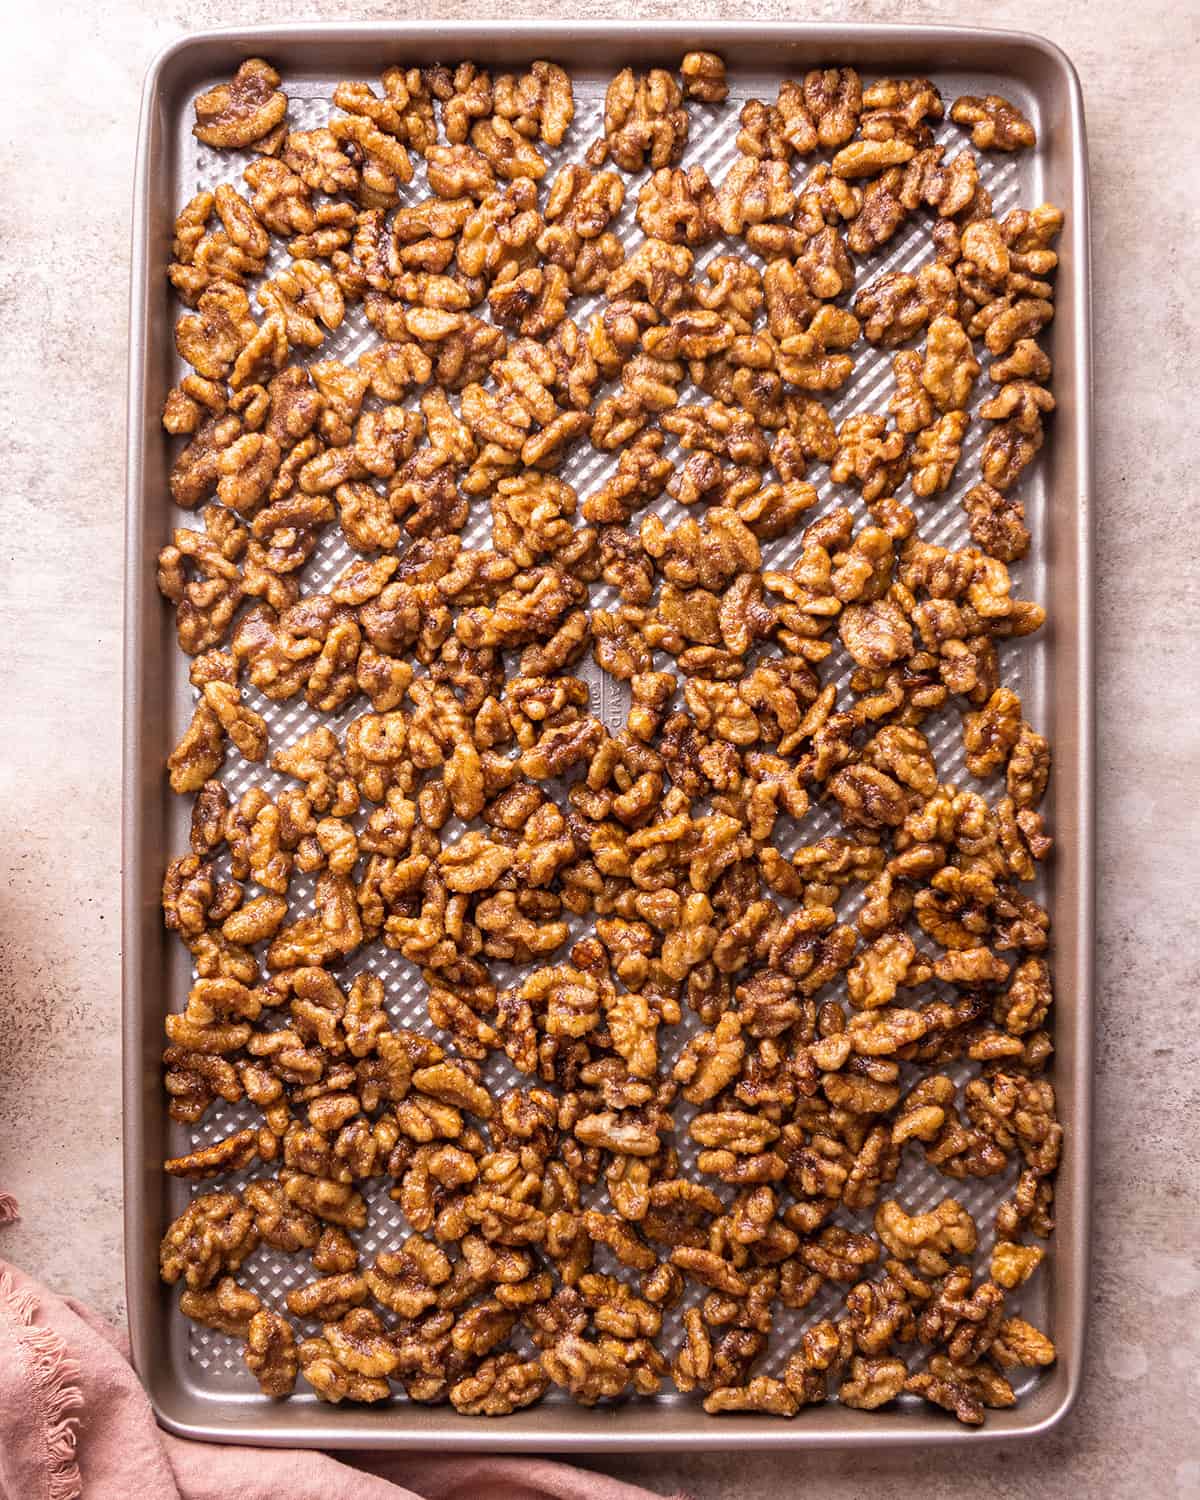 How to Make Candied Walnuts - before baking on a baking sheet